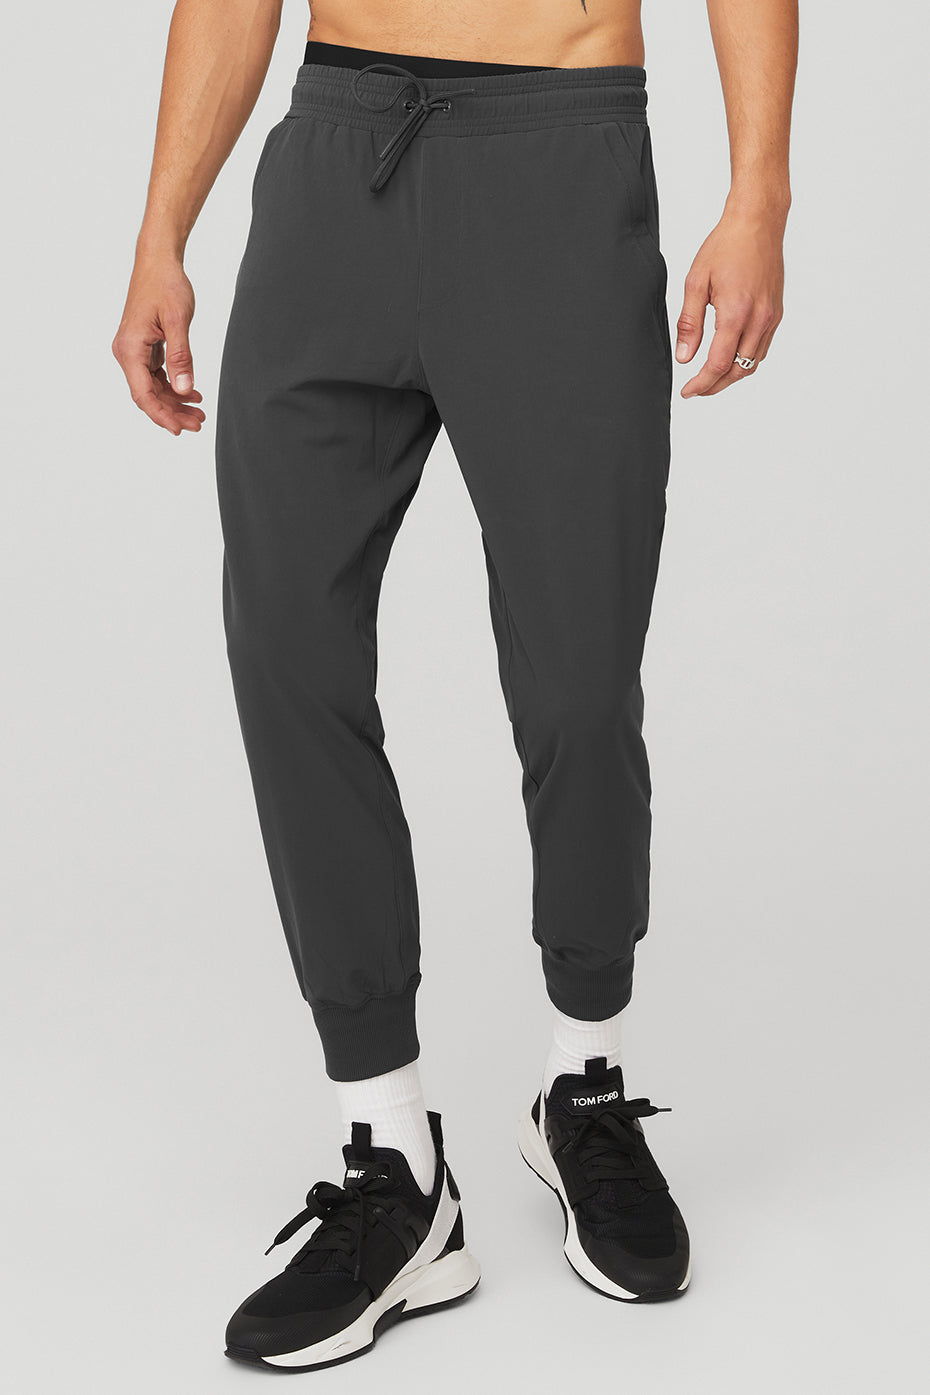 Co-Op 7/8 Pant - Anthracite